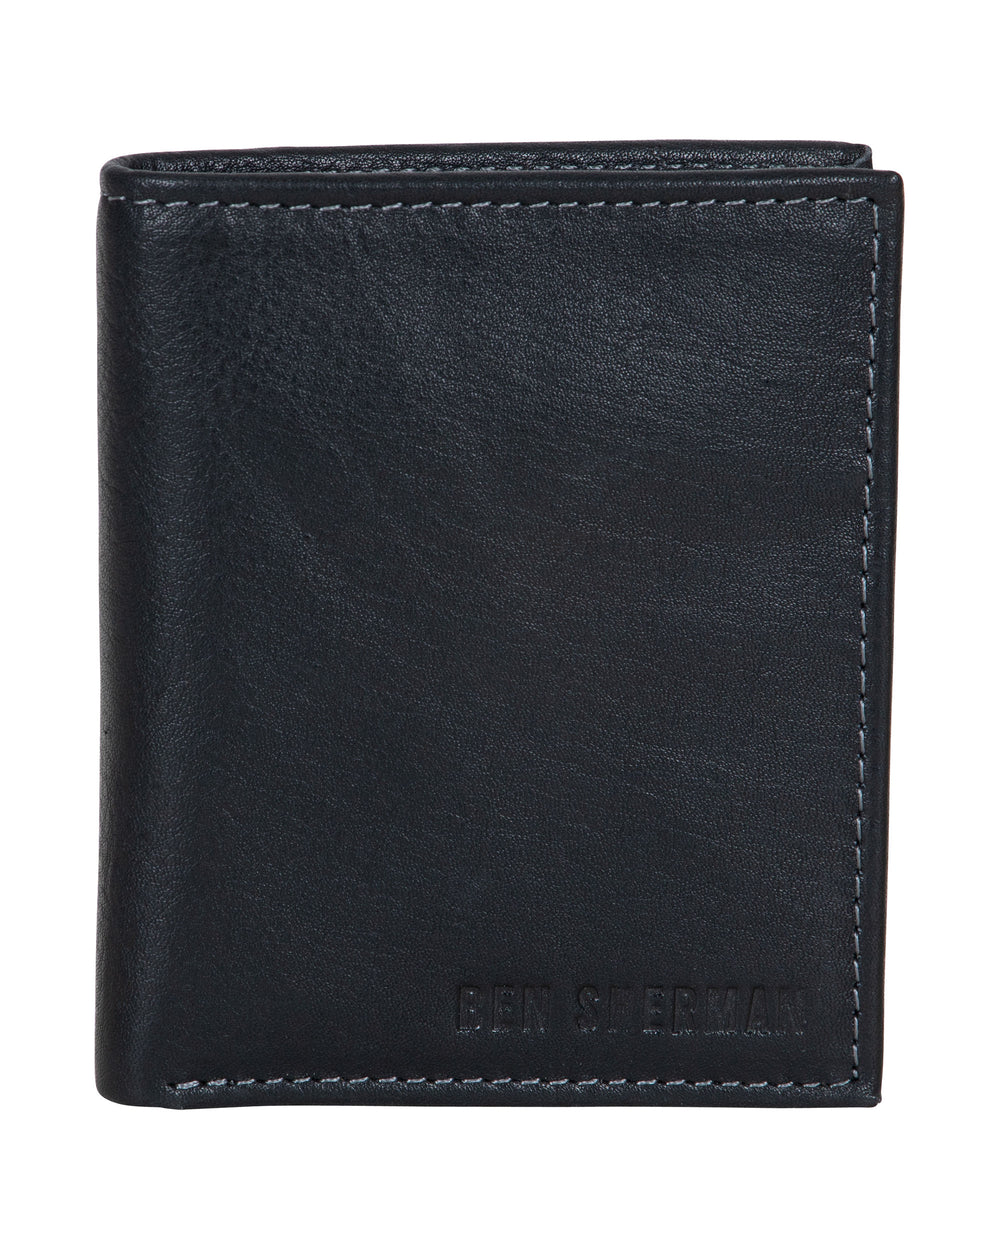 Leather Square Passcase Bifold Wallet - Black